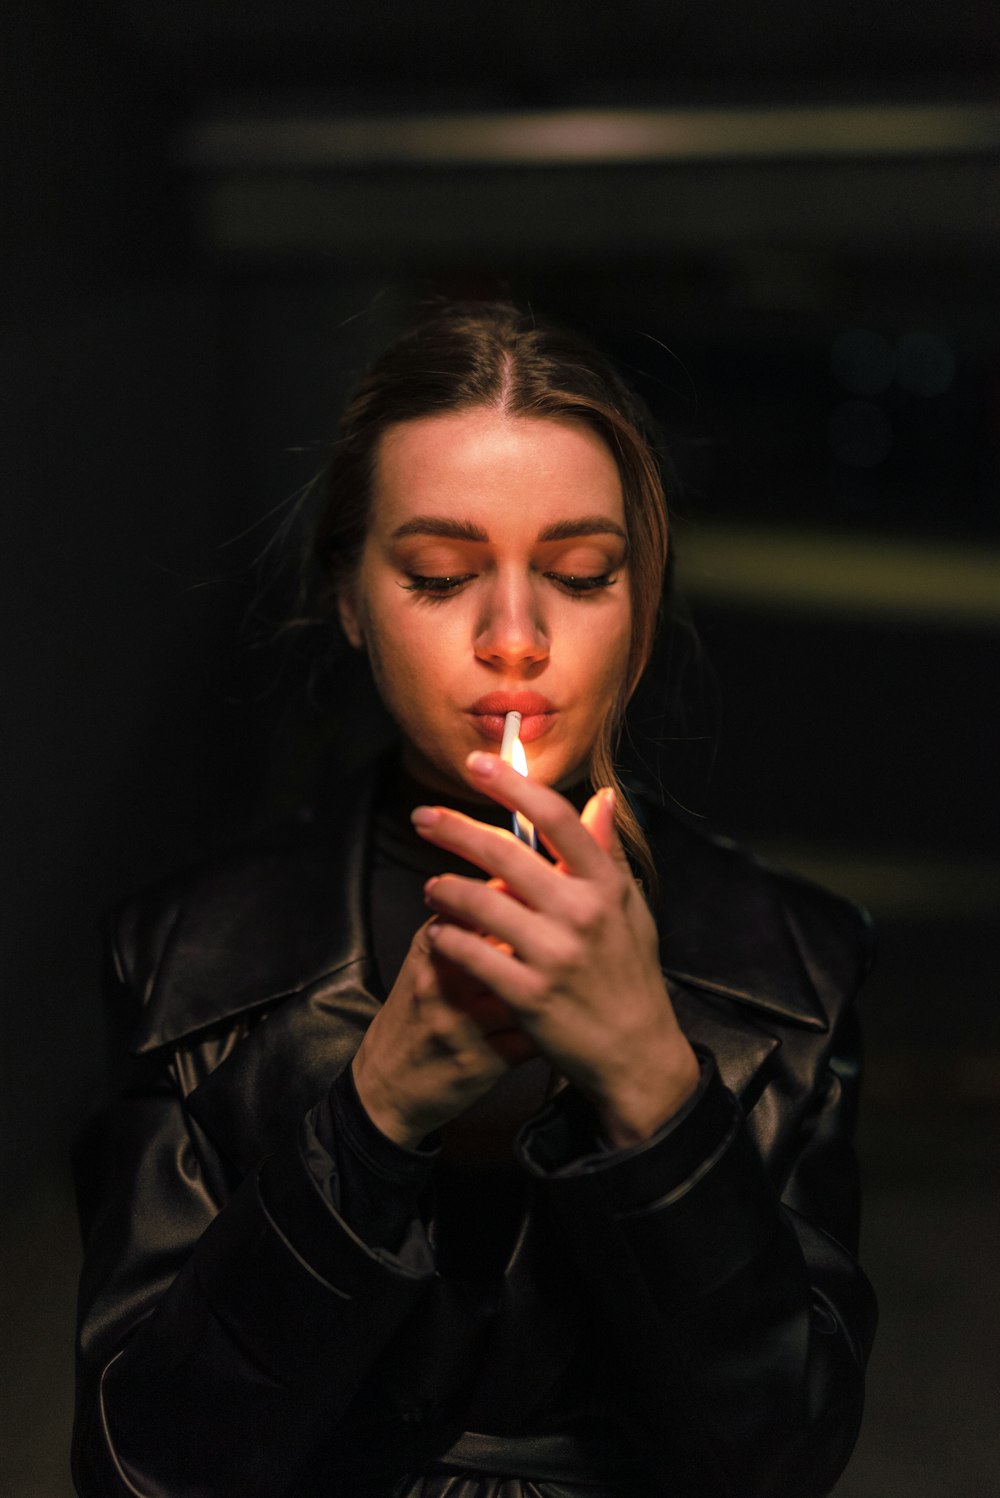 a woman in a black leather jacket lighting a cigarette